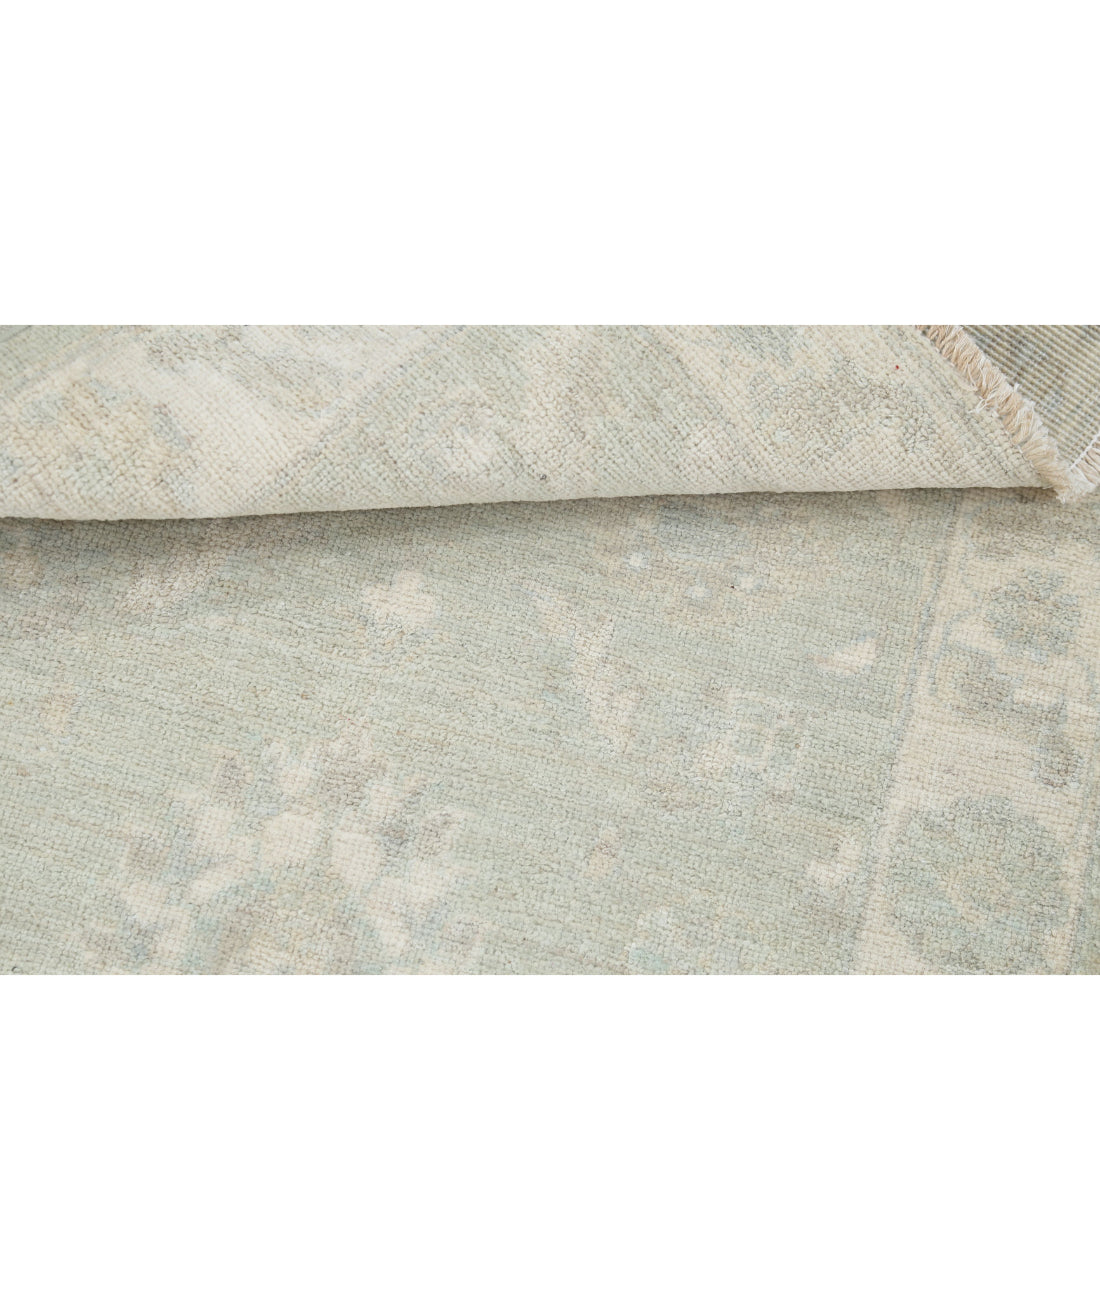 Hand Knotted Serenity Wool Rug - 2'3'' x 2'9'' 2'3'' x 2'9'' (68 X 83) / Green / Ivory